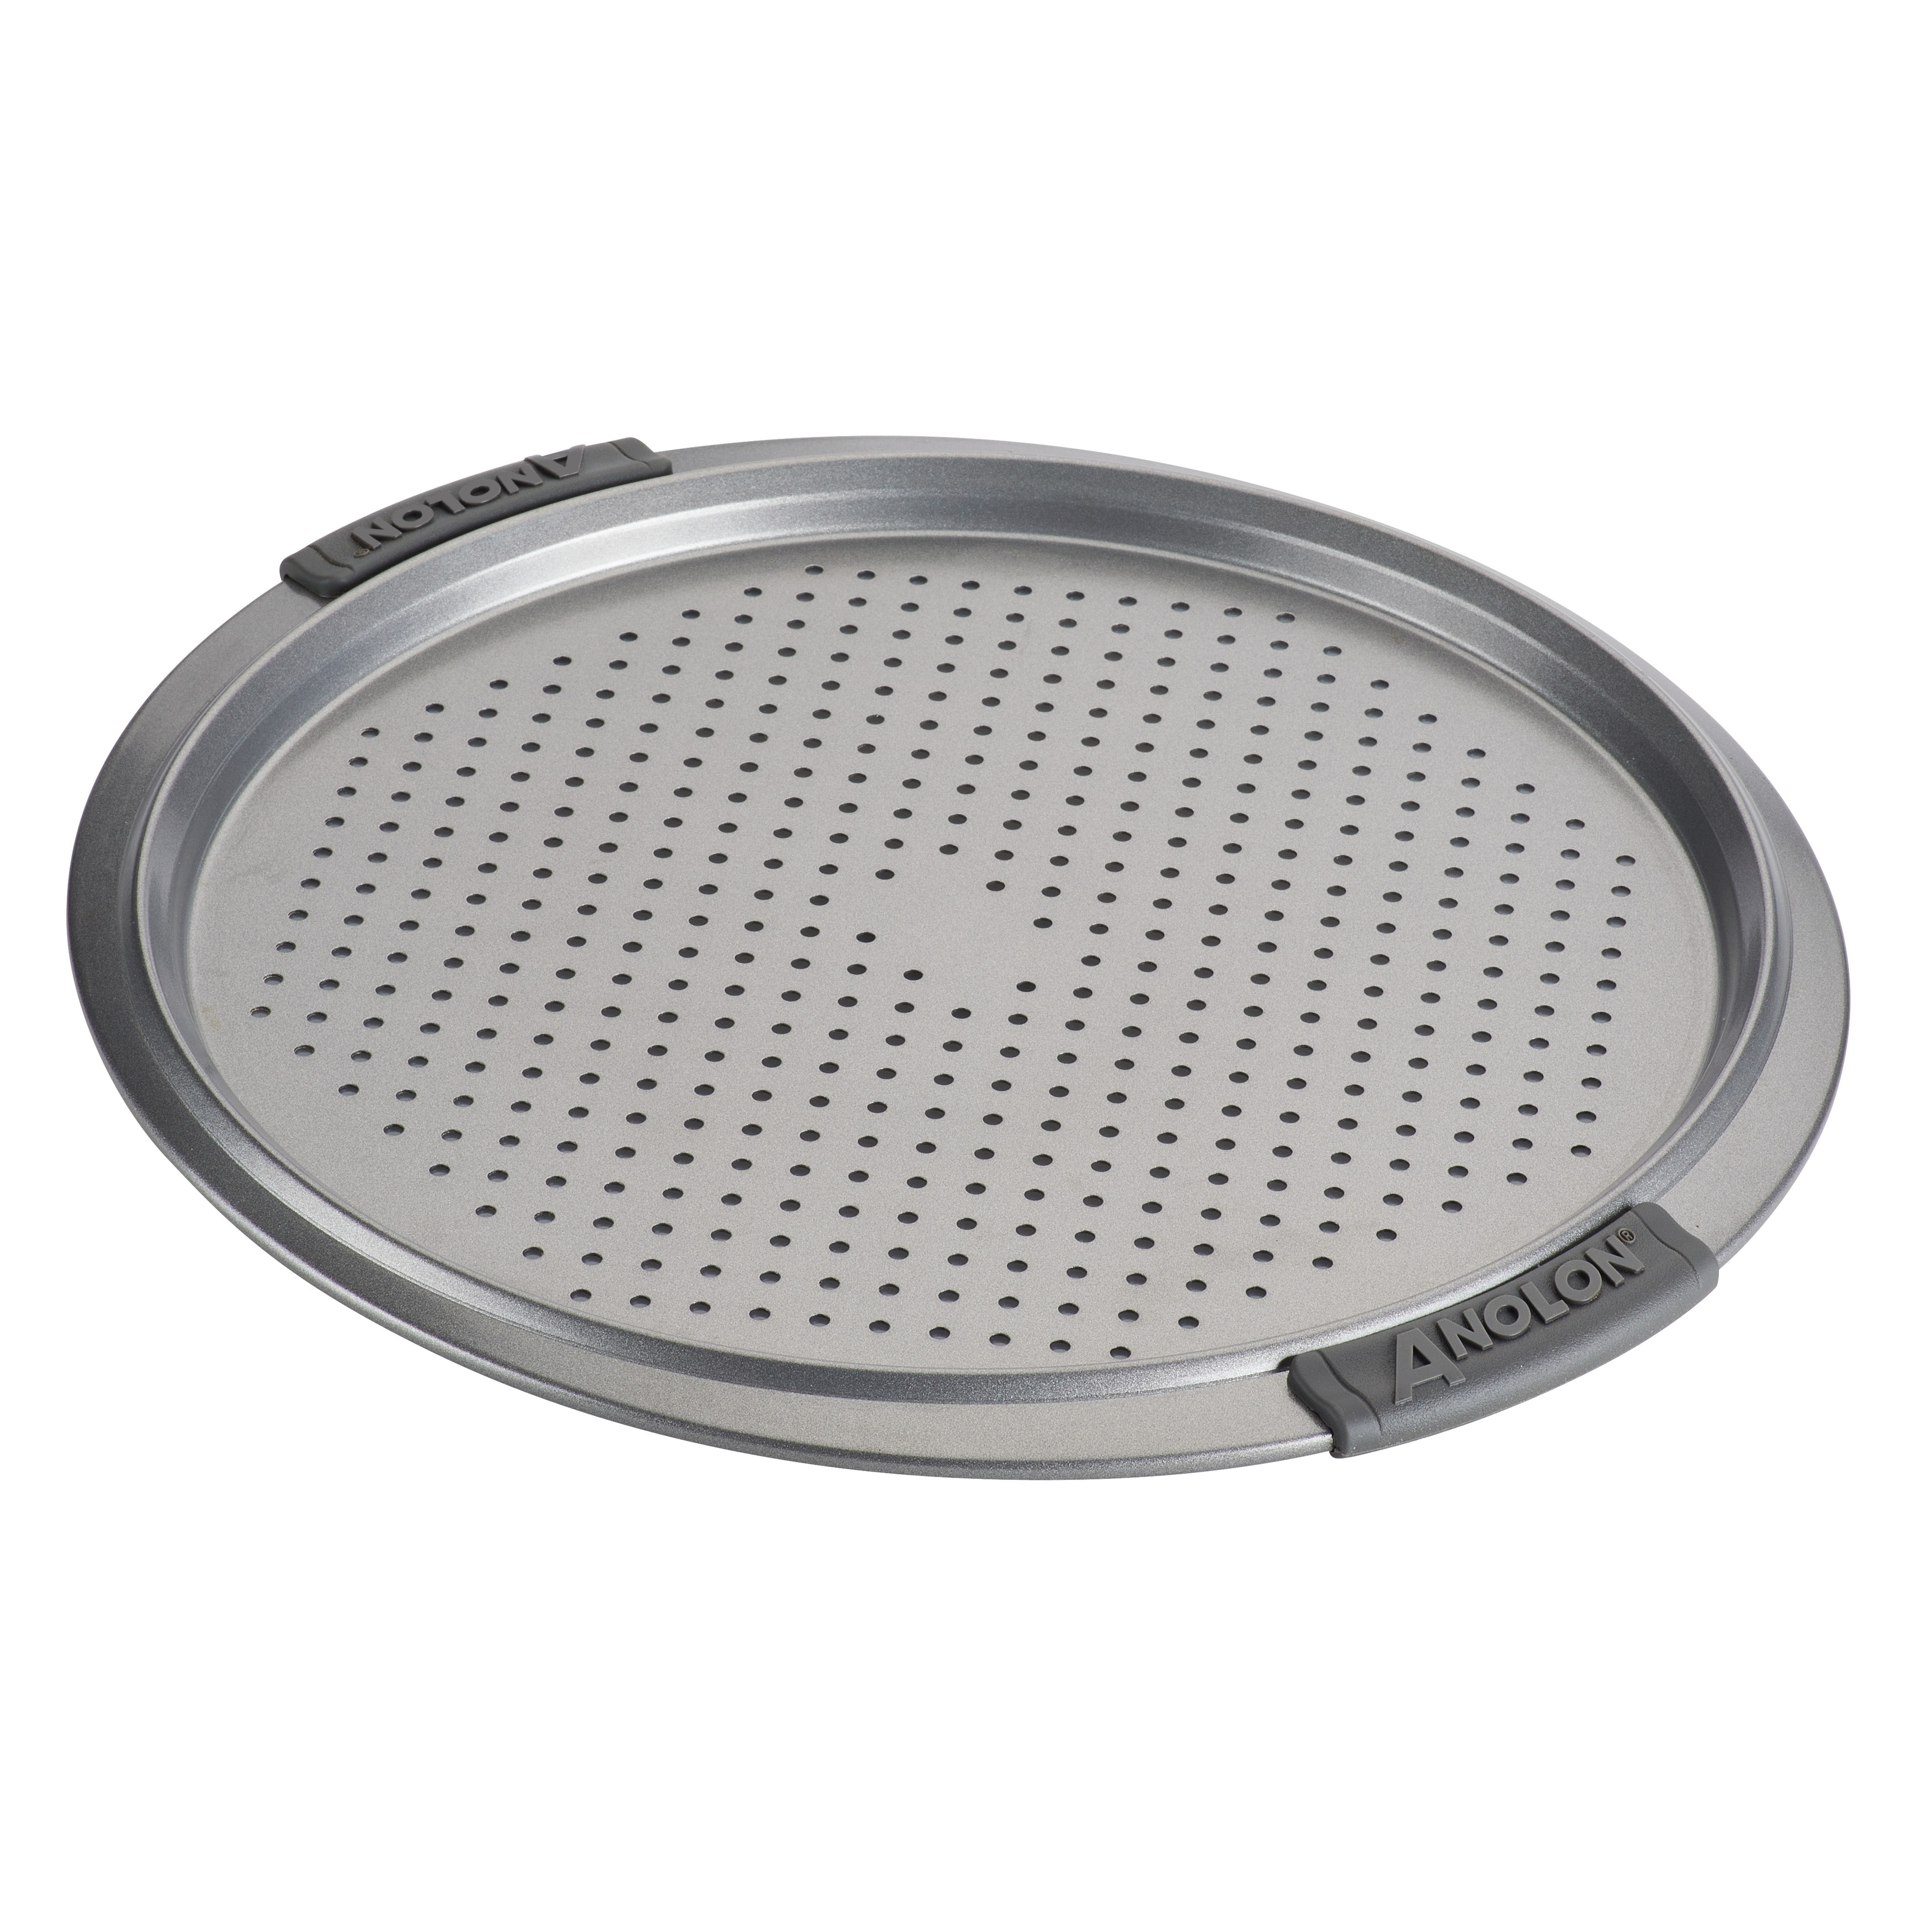 https://ak1.ostkcdn.com/images/products/is/images/direct/a0e1a2b929ecd8b6579ccdedc5941d950432546e/Anolon-Advanced-Nonstick-Bakeware-Round-Perforated-Pizza-Pan%2C-13-Inch%2C-Gray.jpg